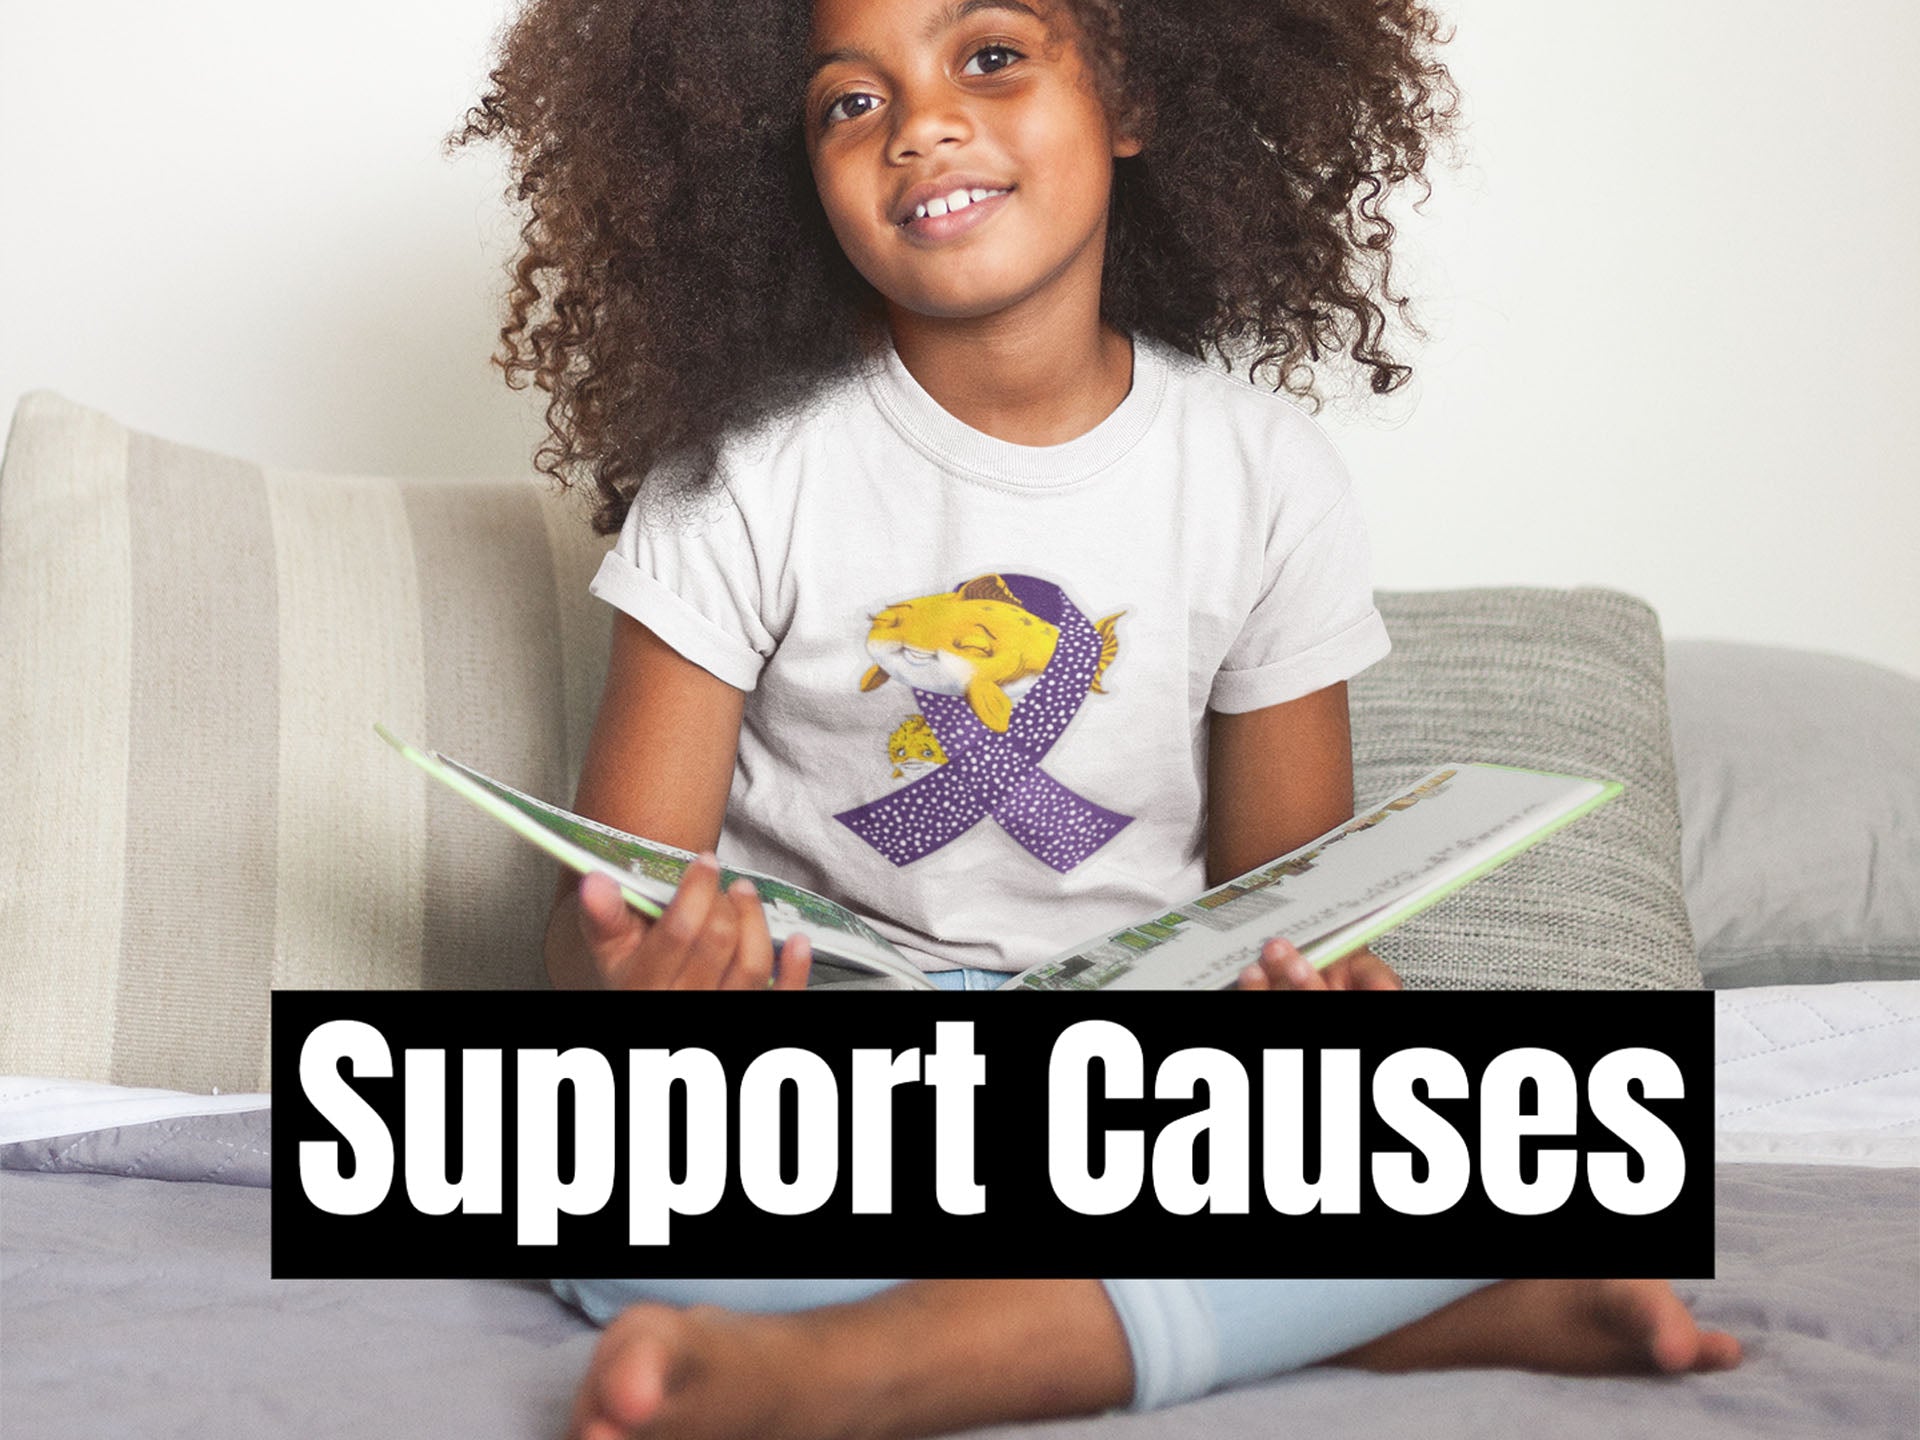 Support Causes